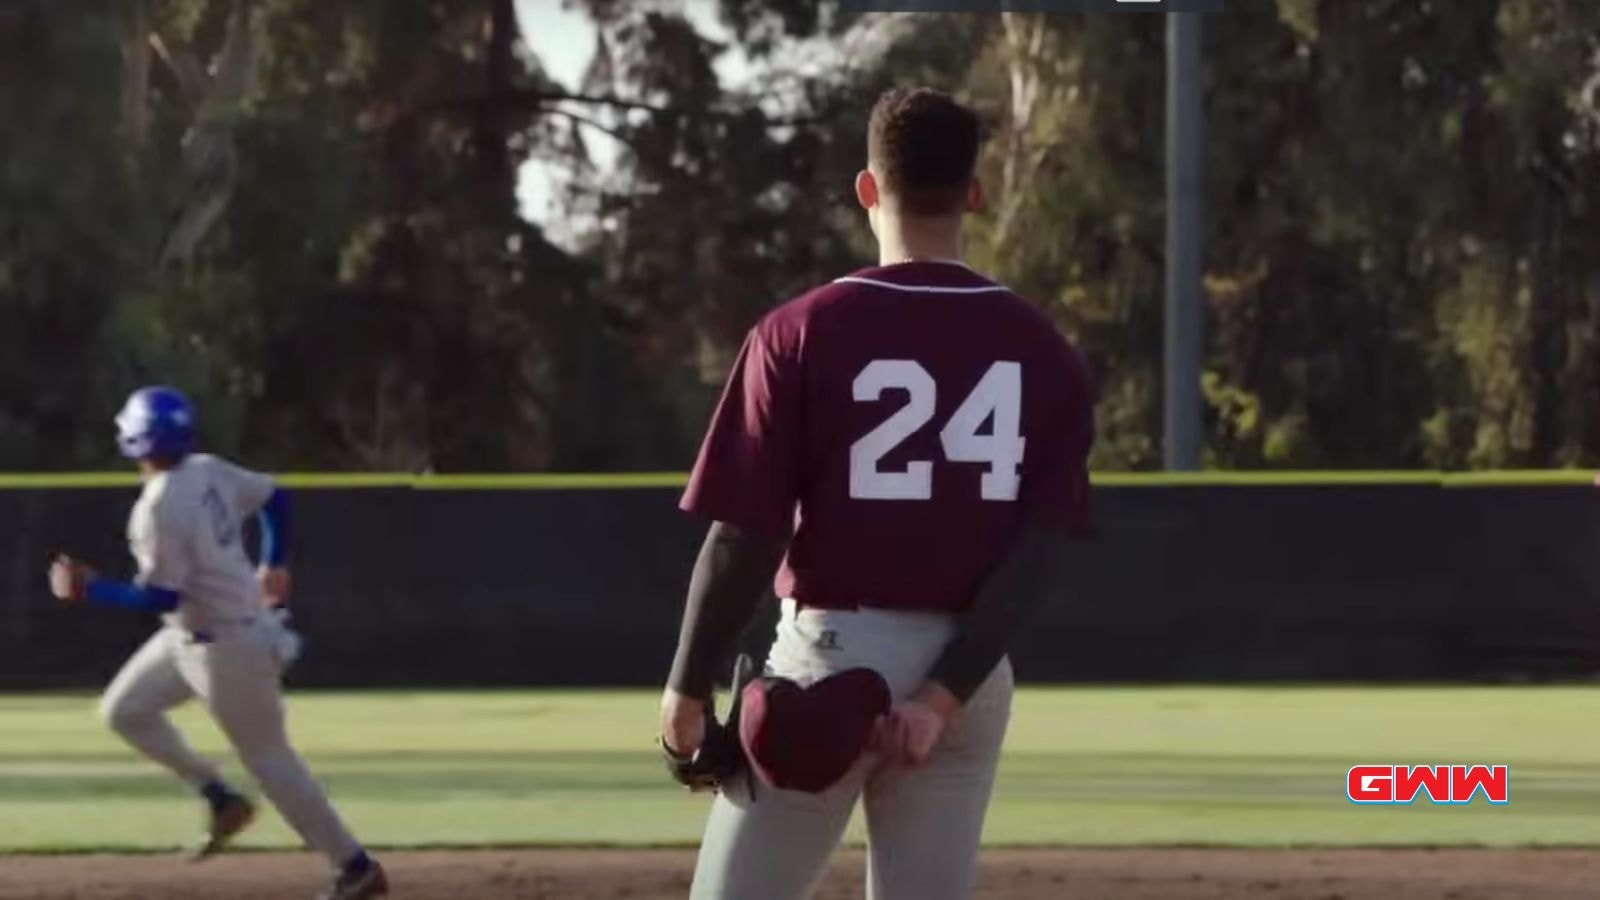 Baseball player in jersey number 24 on the field, When is All American Homecoming Season 3 Coming Out